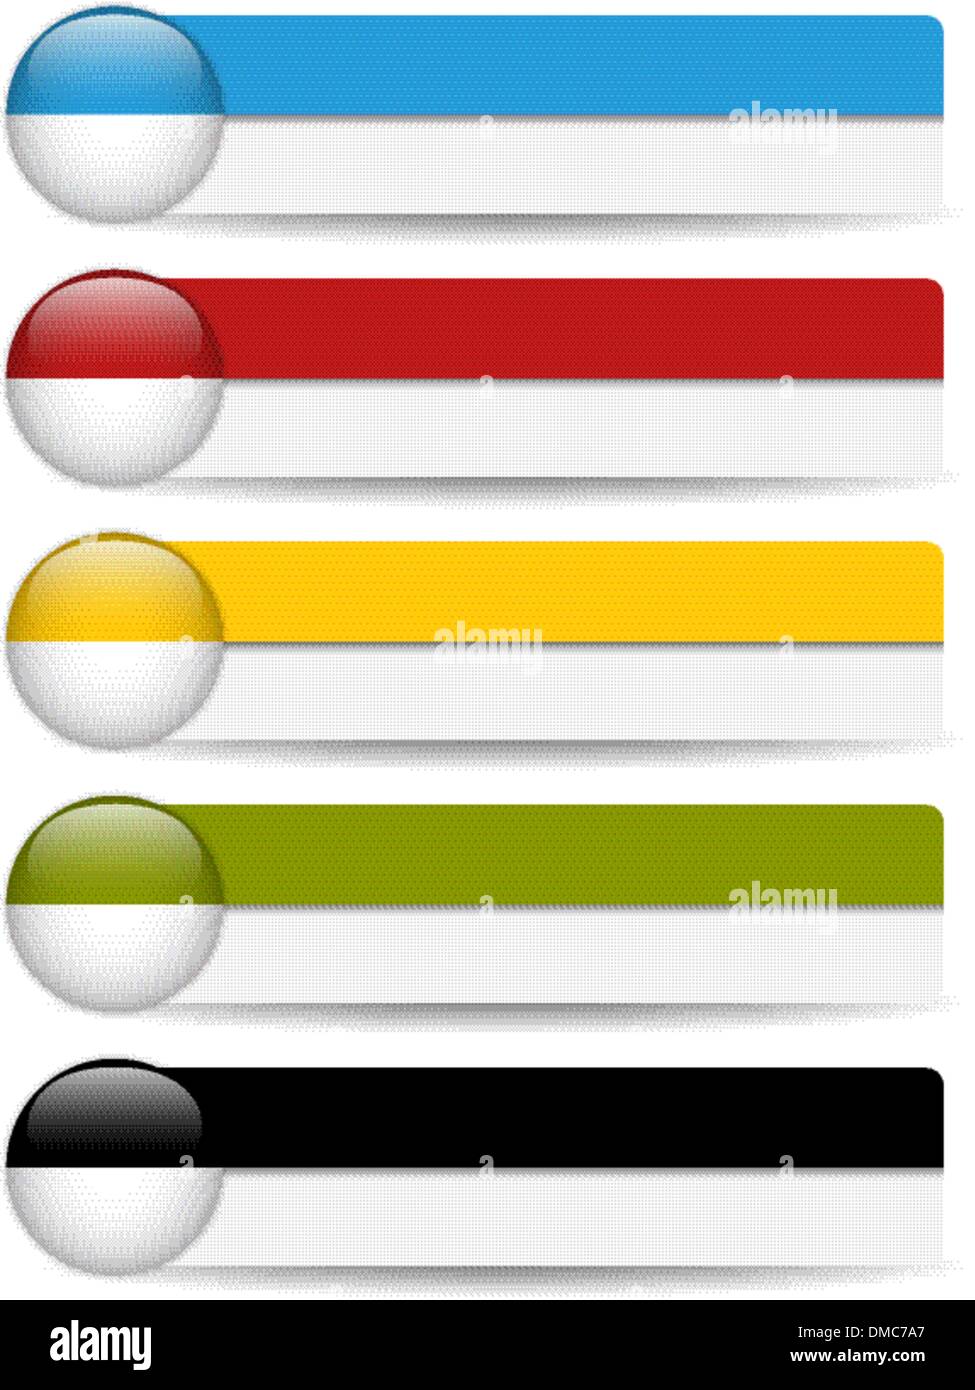 Glossy web buttons with colored bars. Stock Vector